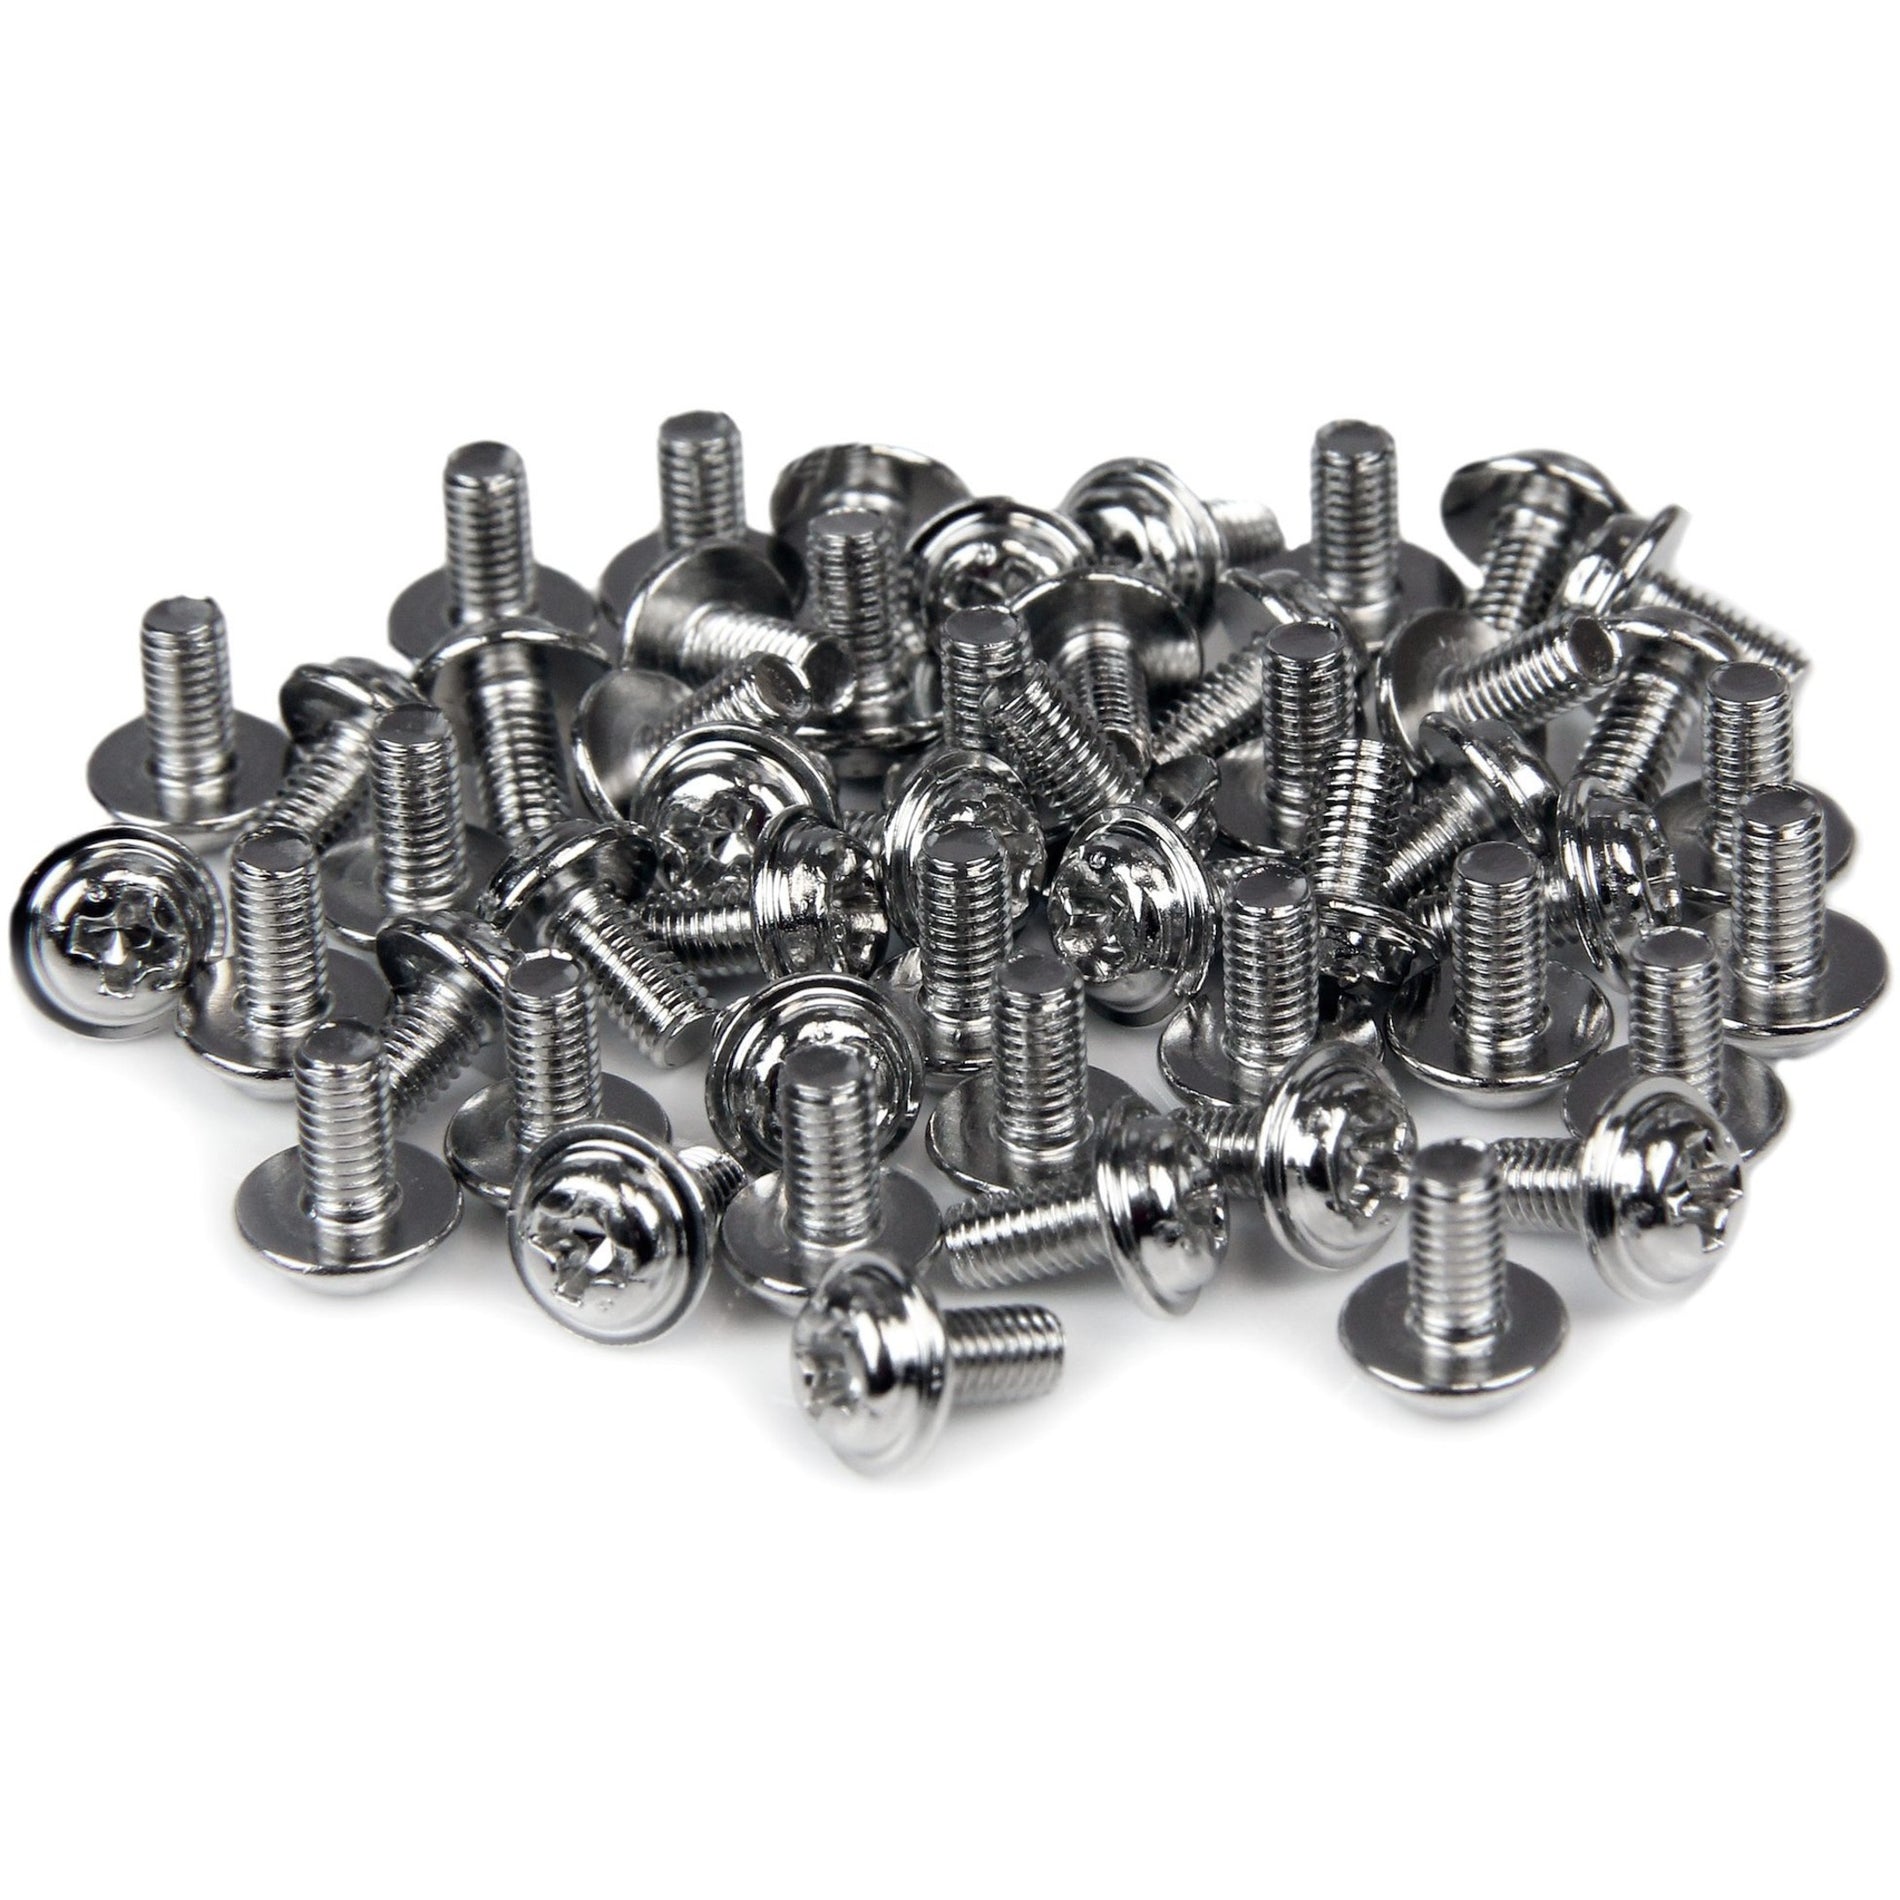 StarTech.com SCREWM3 PC Mounting Computer Screws M3 x 1/4in Long Standoff - 50 Pack, Common M3 Threaded Screw for Mounting Computer Components